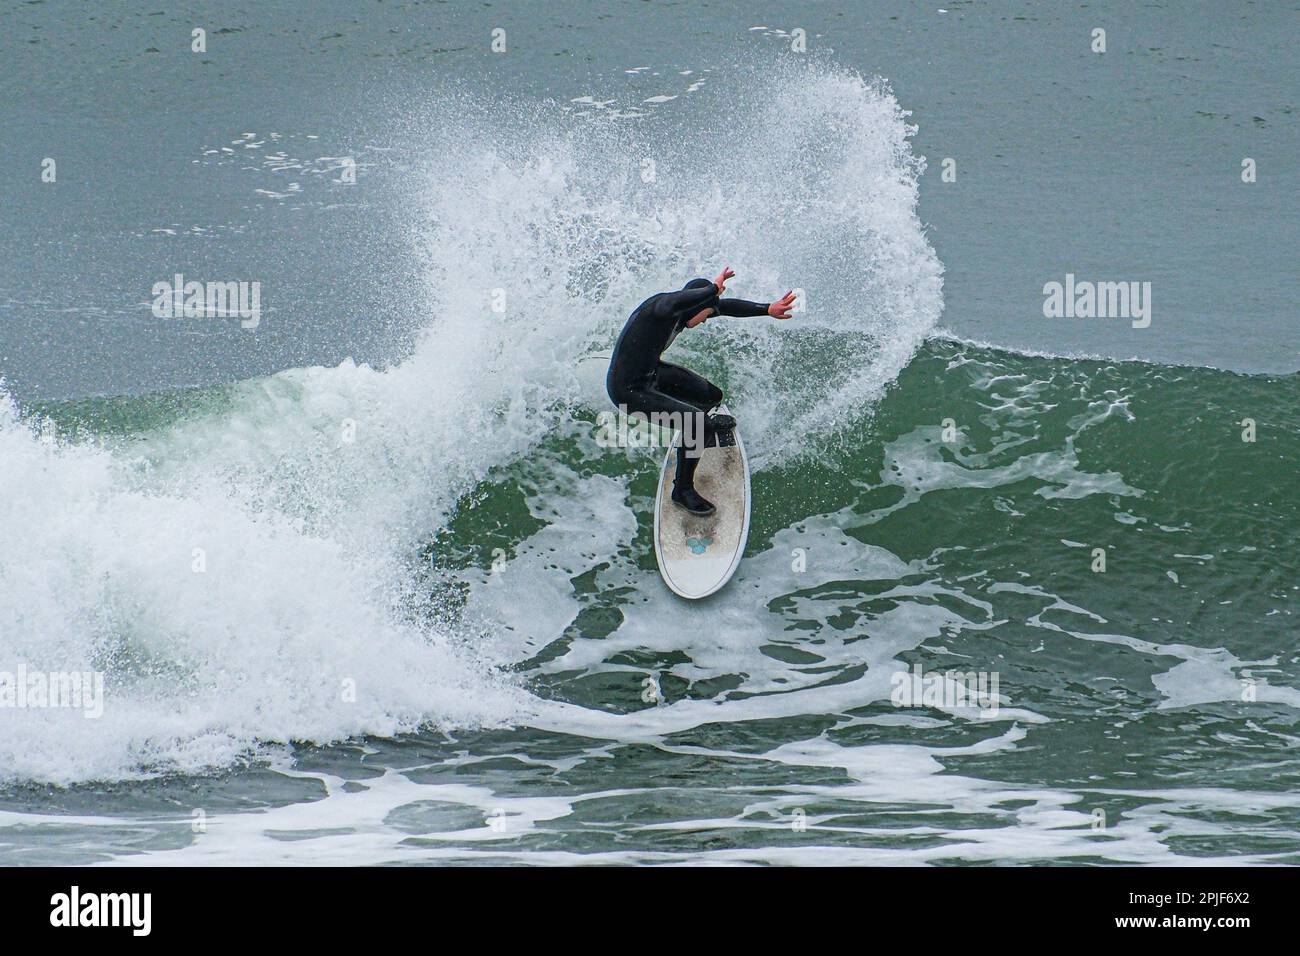 Surfer making a letter C pose as he ride the waves in Cornwall Stock Photo